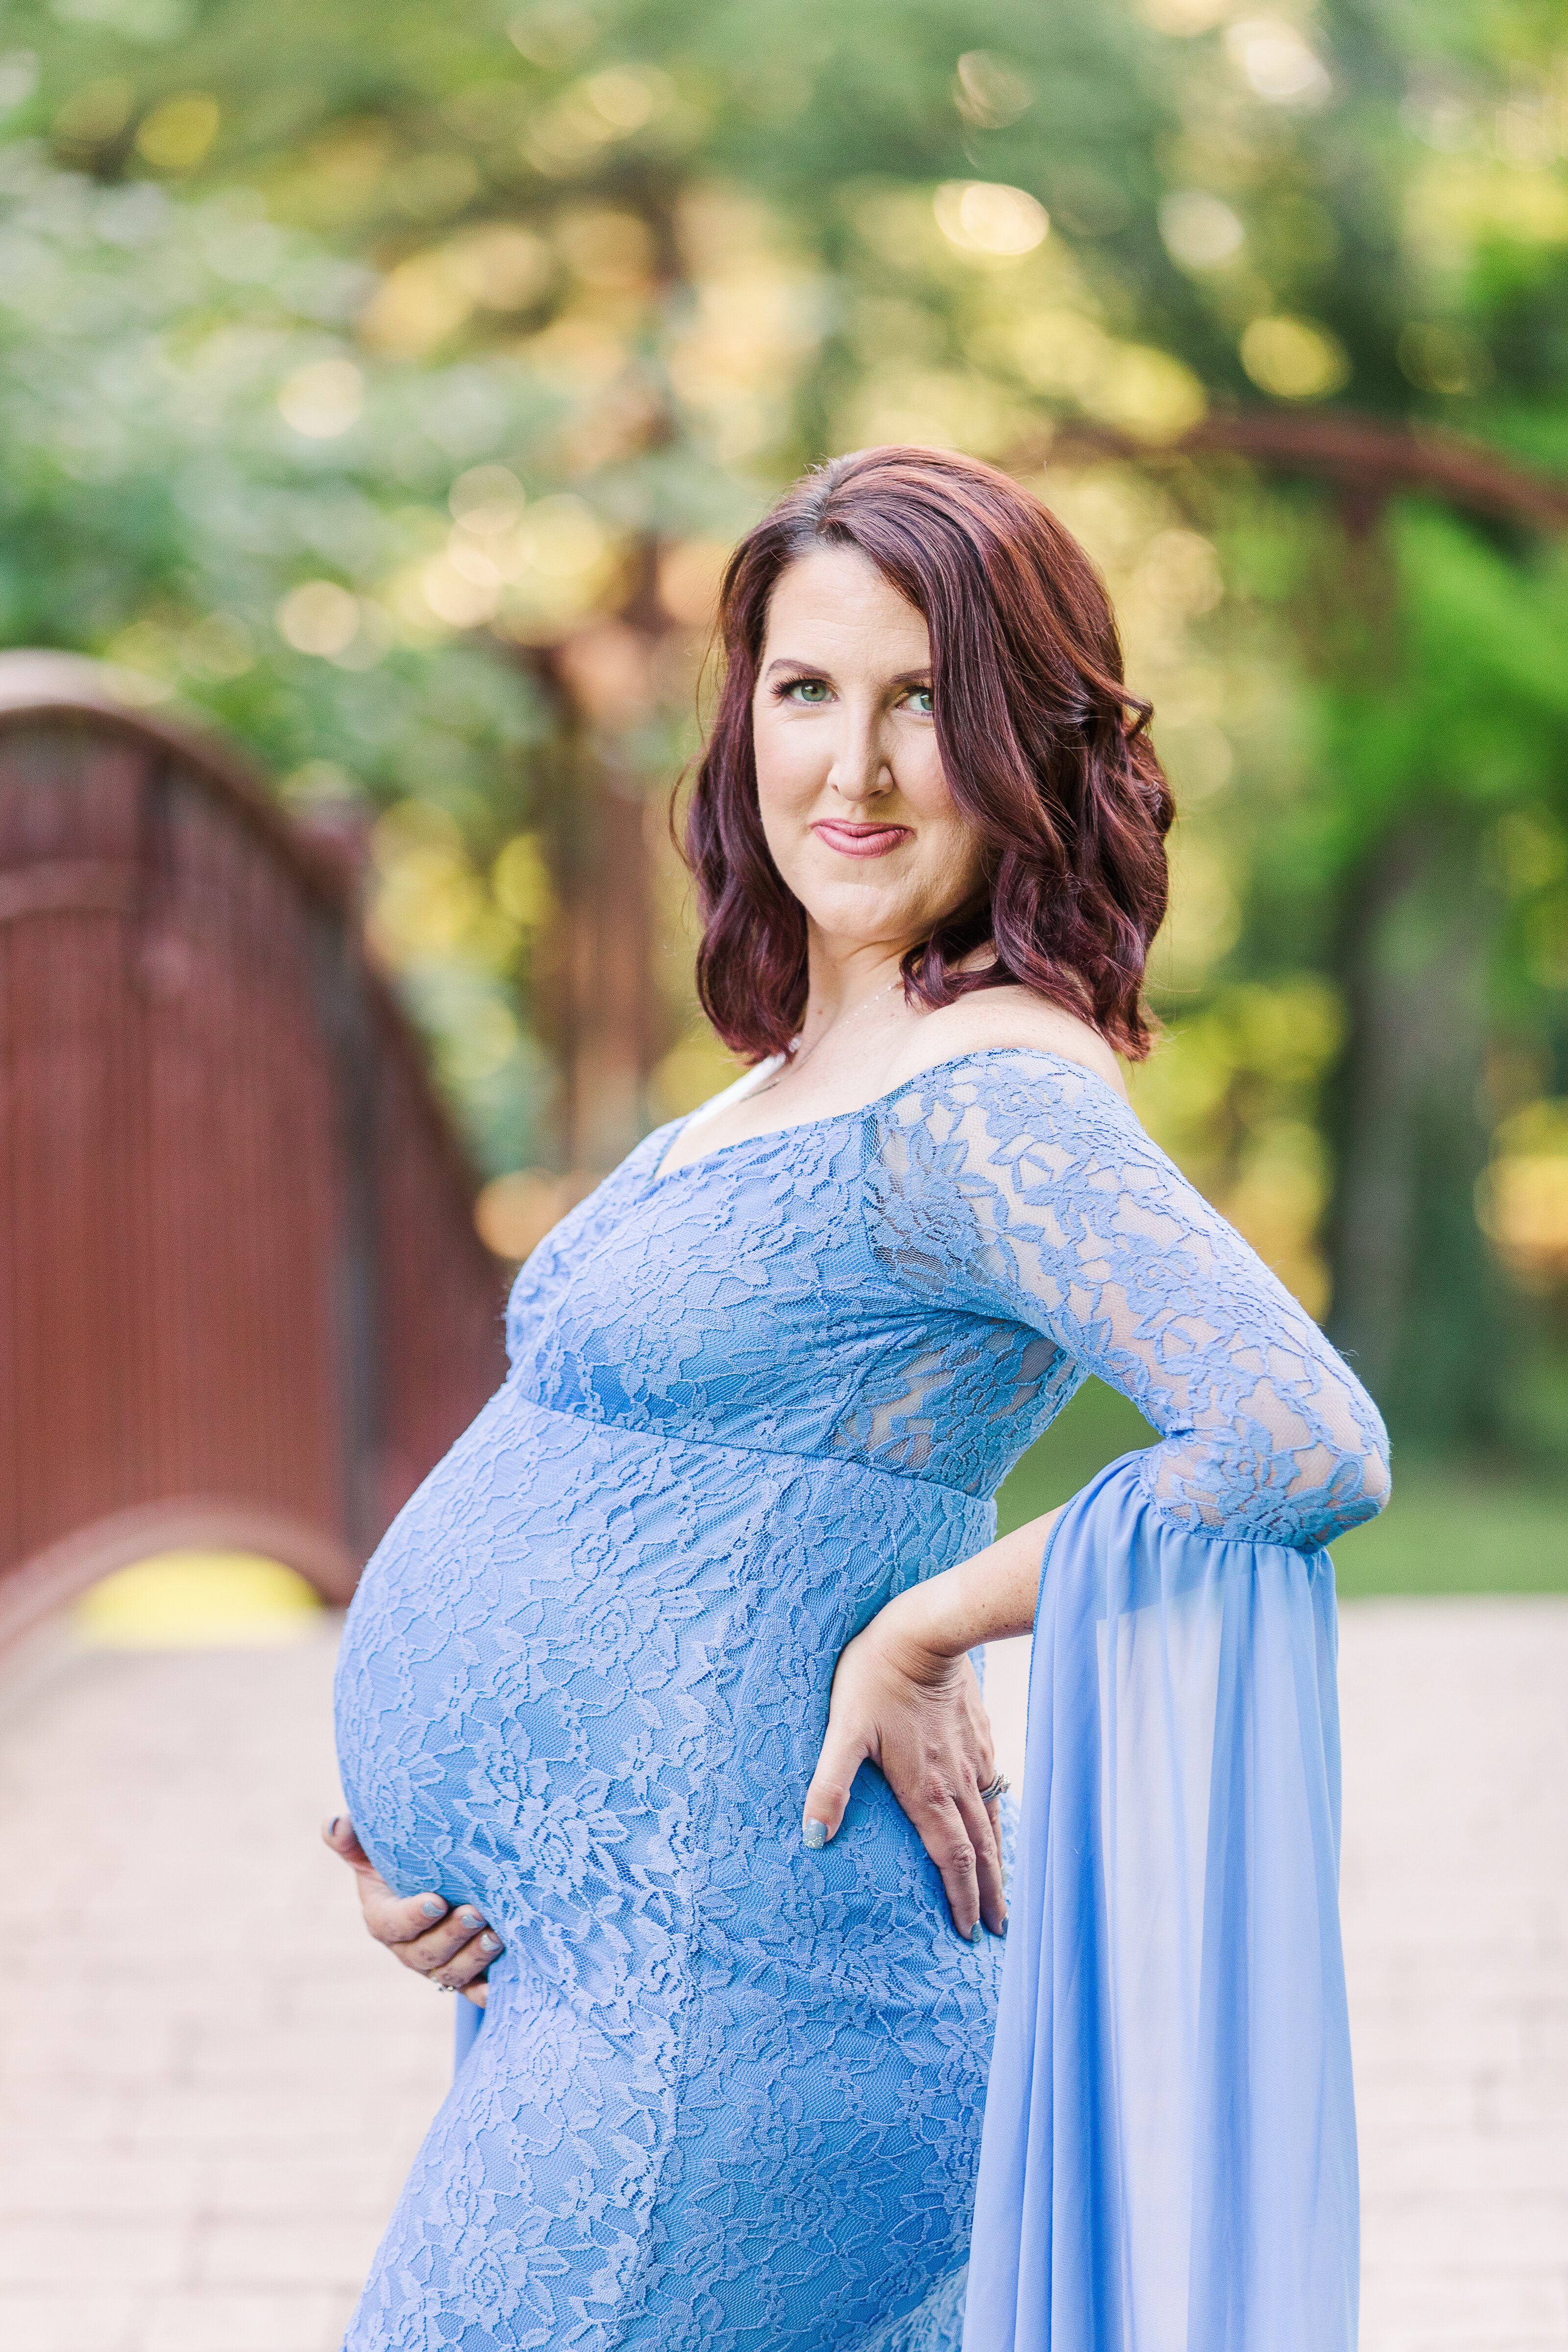 jeanizecilliersphotography-MATERNITY-100